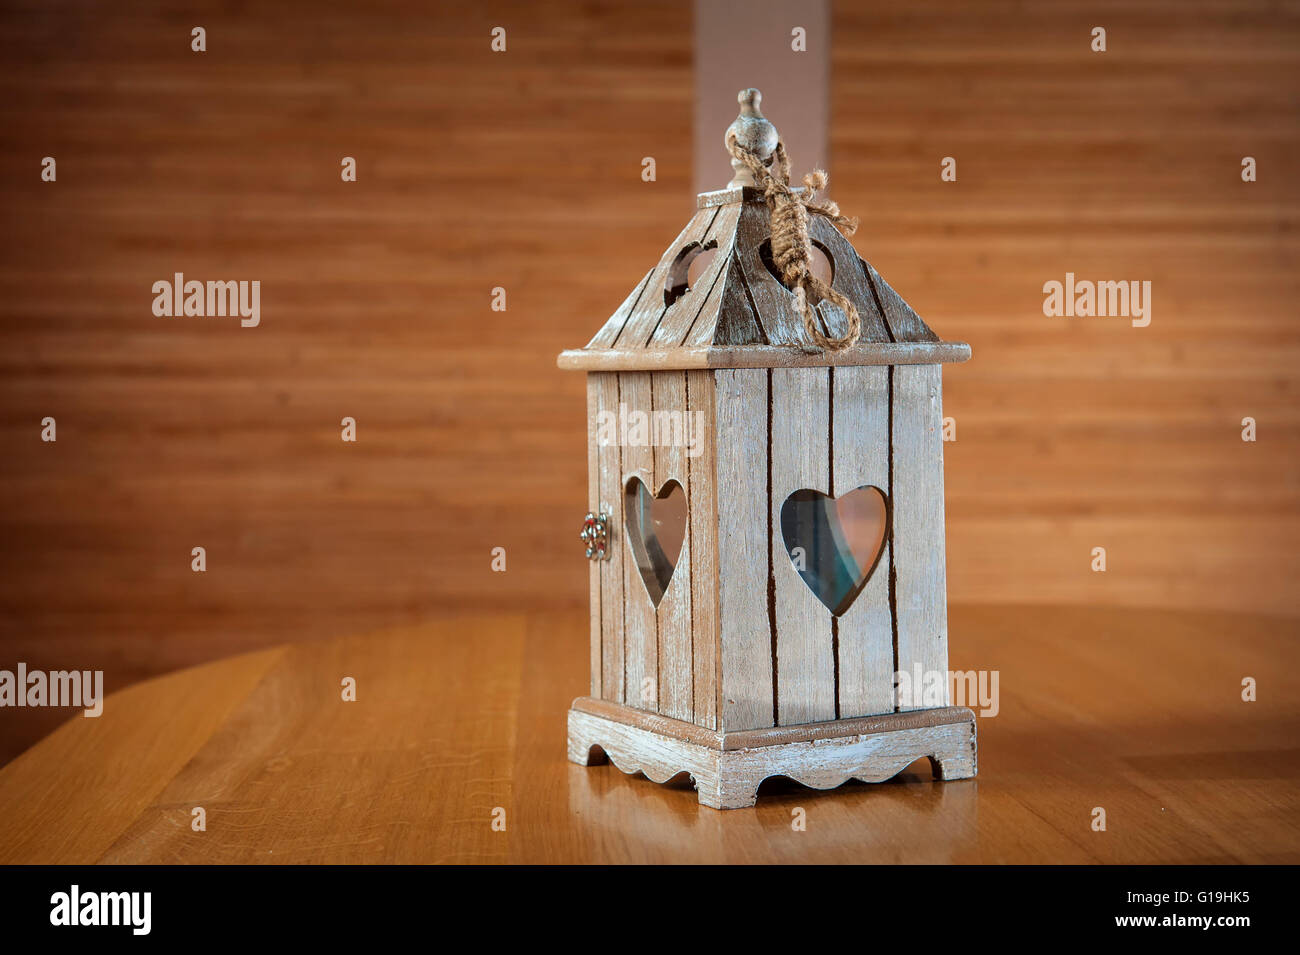 wooden candlestick with heart shape Stock Photo